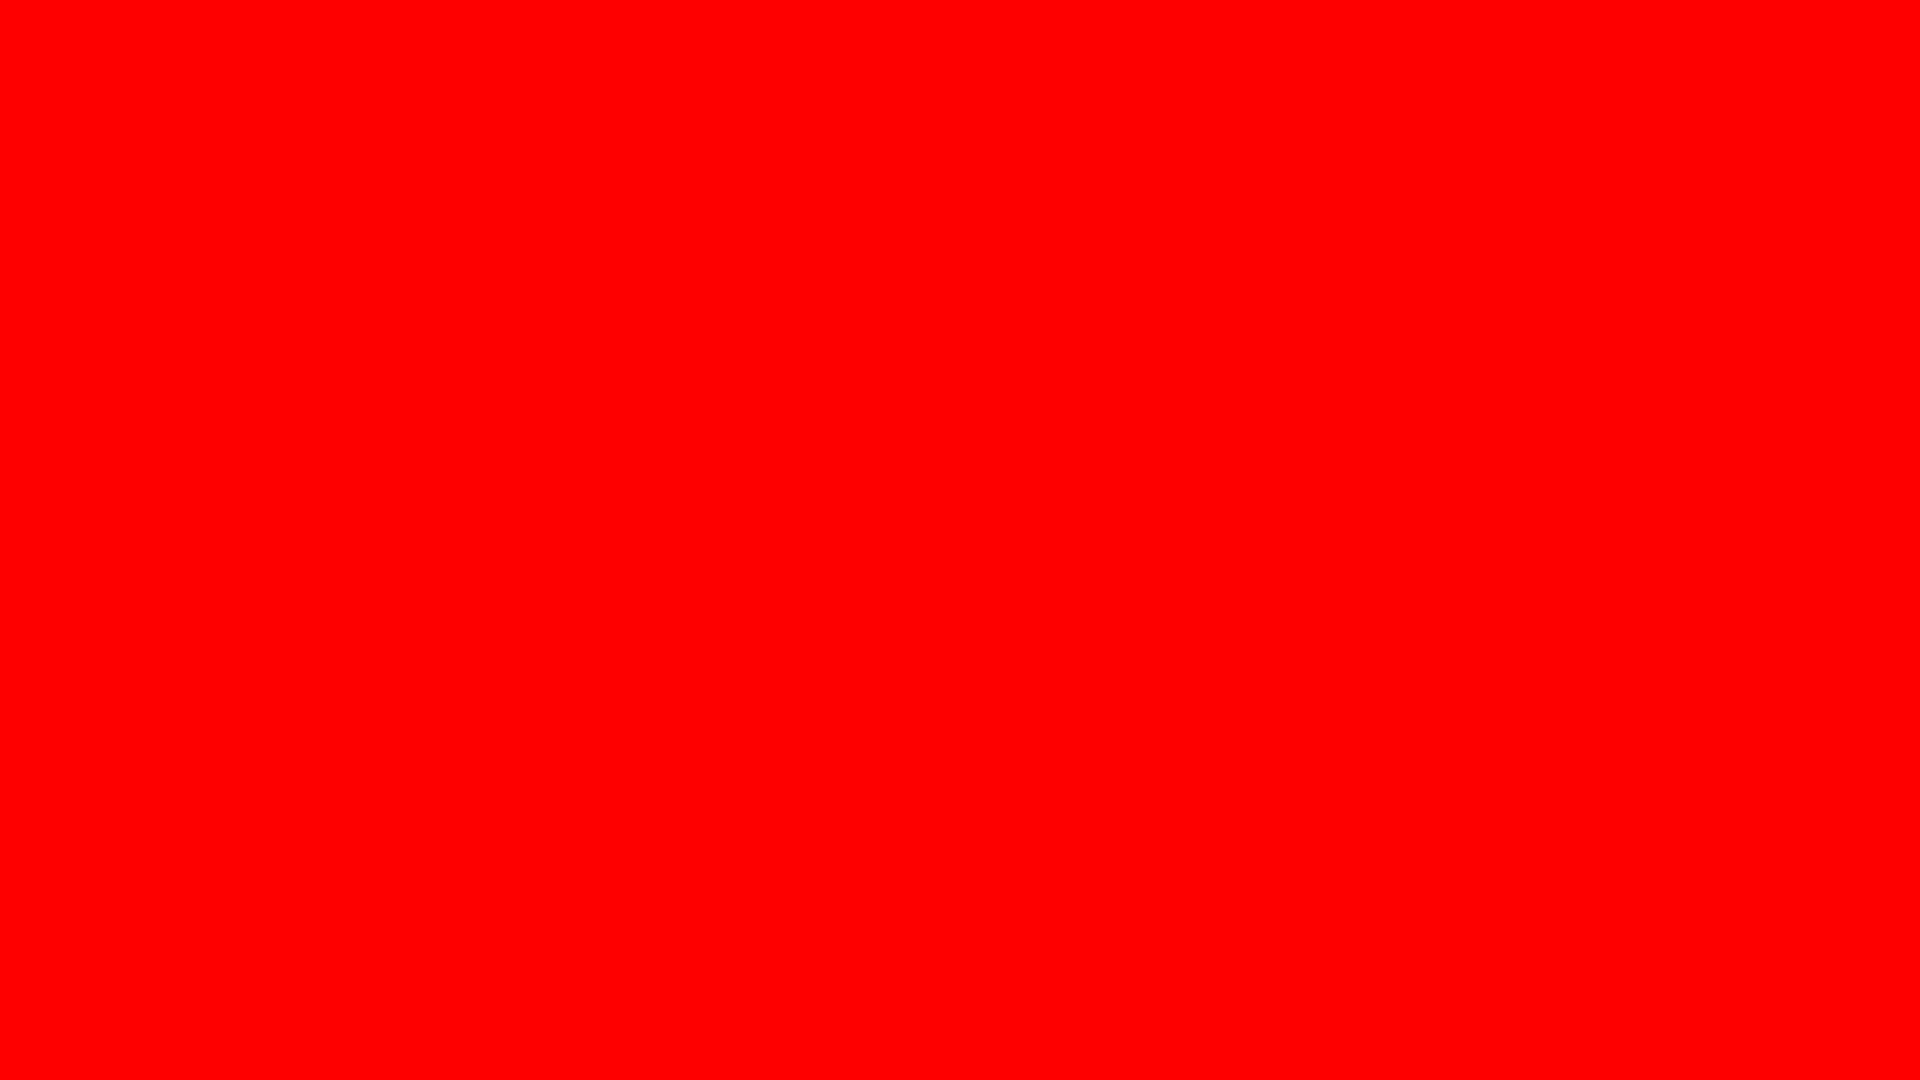 Free resolution Red solid color background, view and